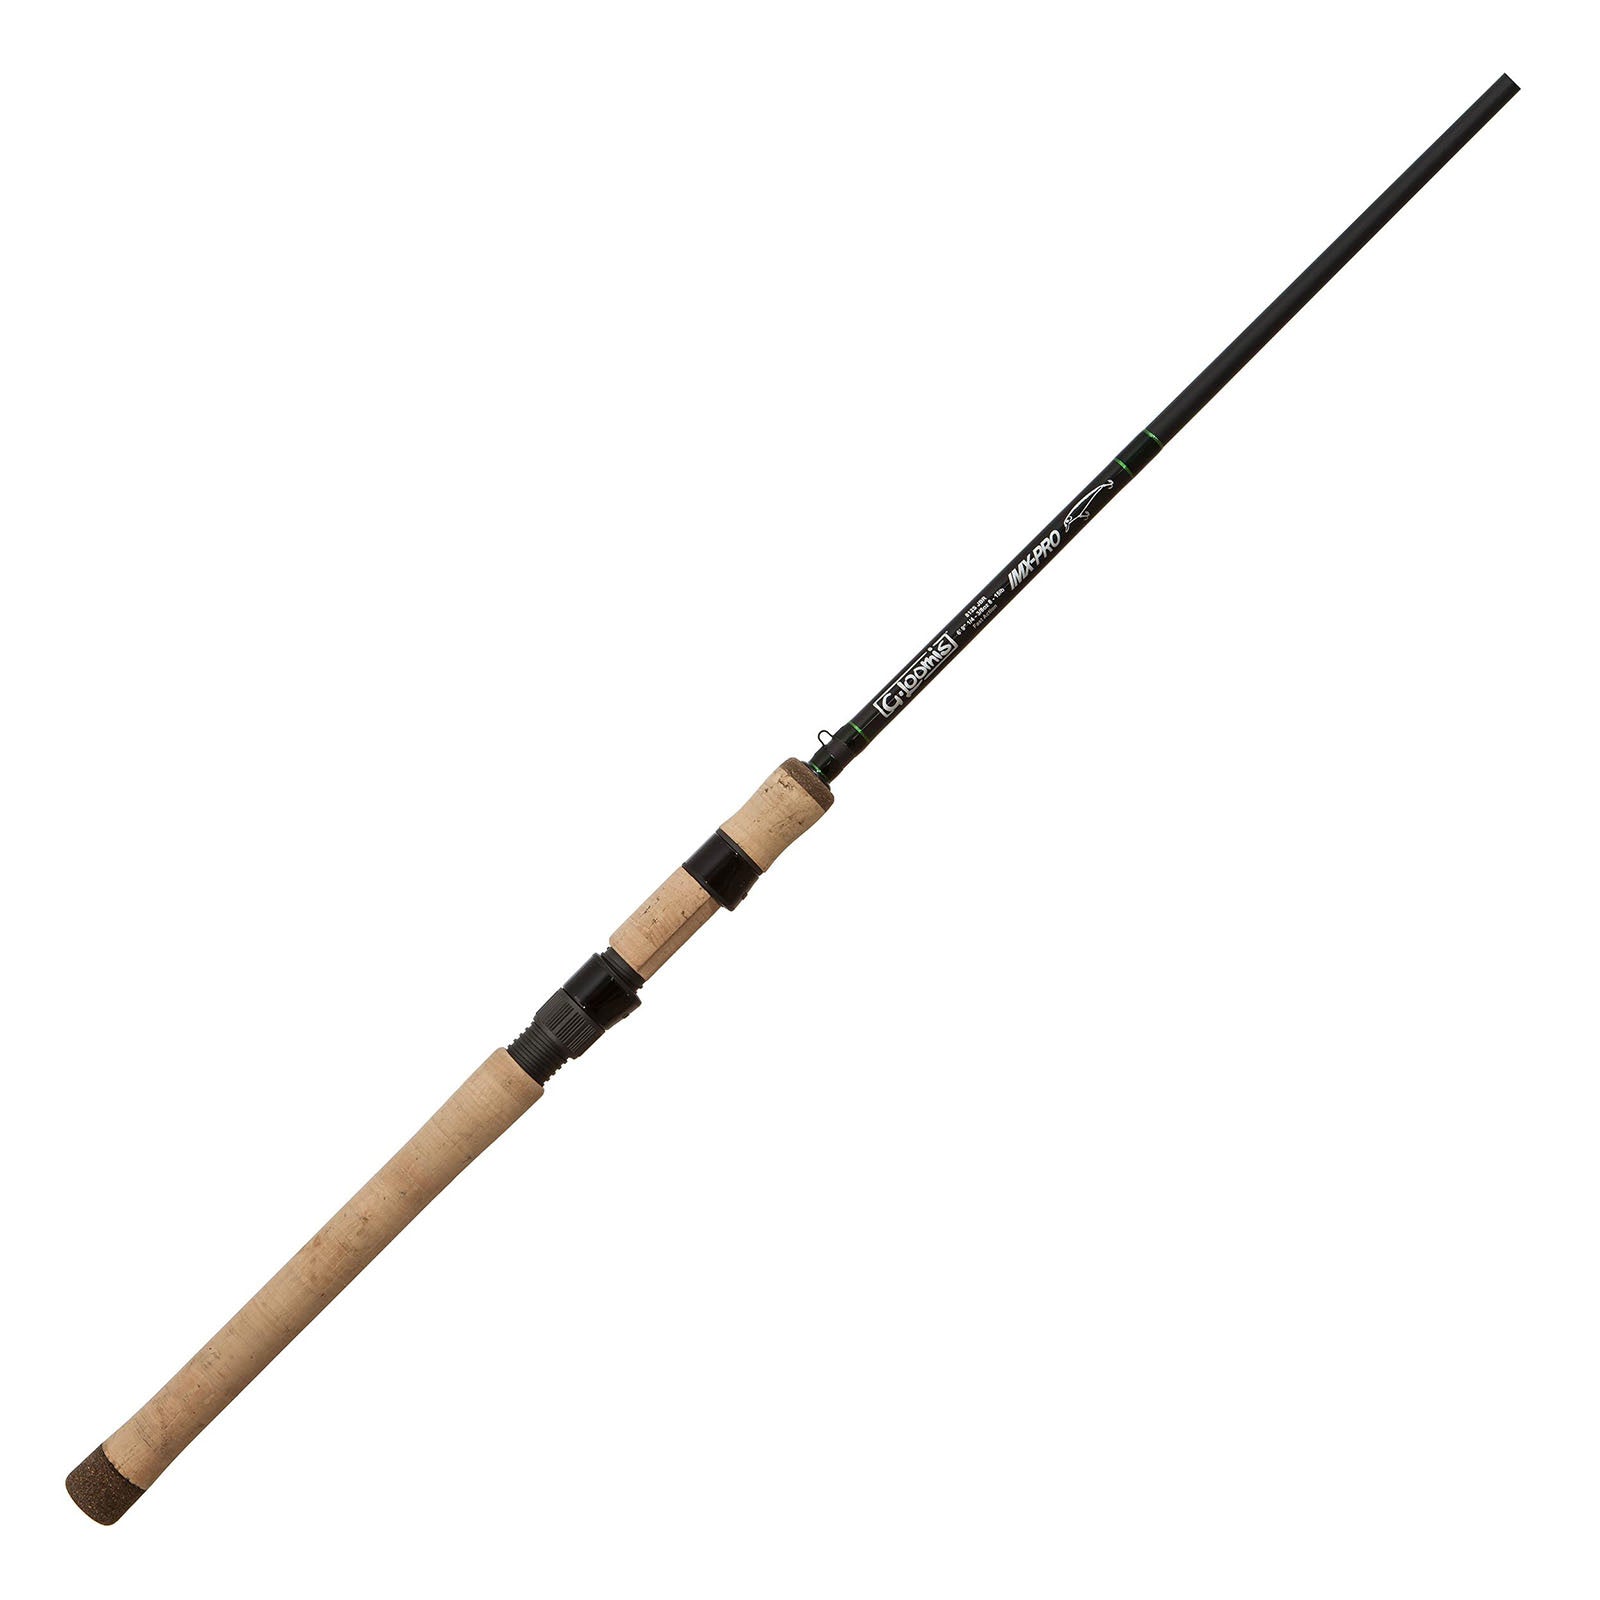 G. Loomis IMX-Pro Flip/Punch 7'5" Casting Rod - Hamilton Bait and Tackle